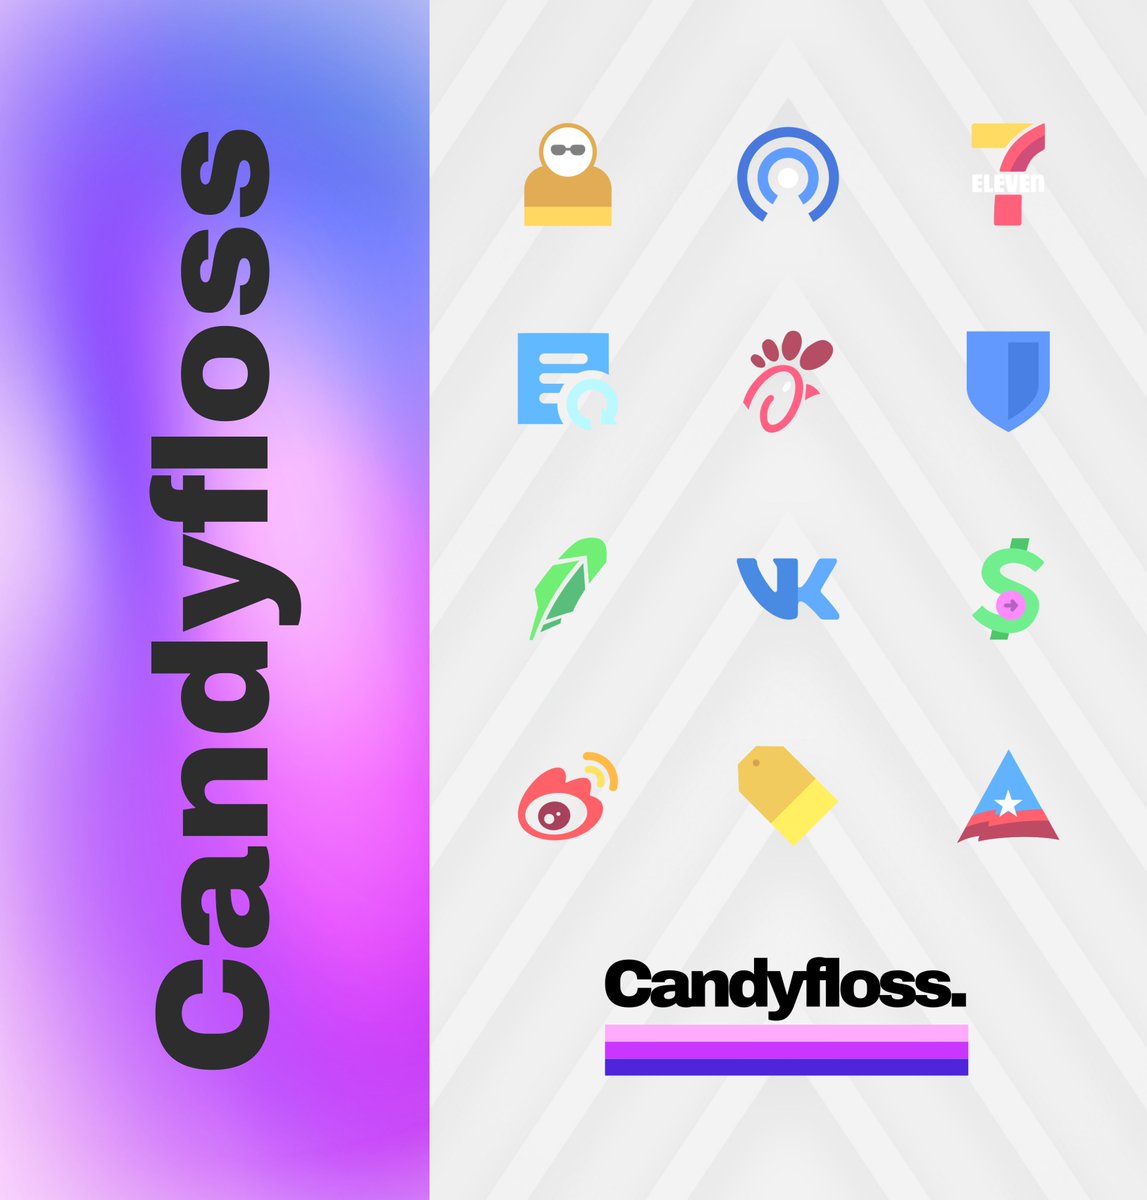 Weekly update for Candyfloss is live! 🔸 Added 30 new awesome icons! 🔸 790+ total icons now! Get it here at EARLY ACCESS PRICES: bit.ly/CandyflossIcons RTs and ❤️s ll be highly appreciated! Cheers peeps and enjoy!!